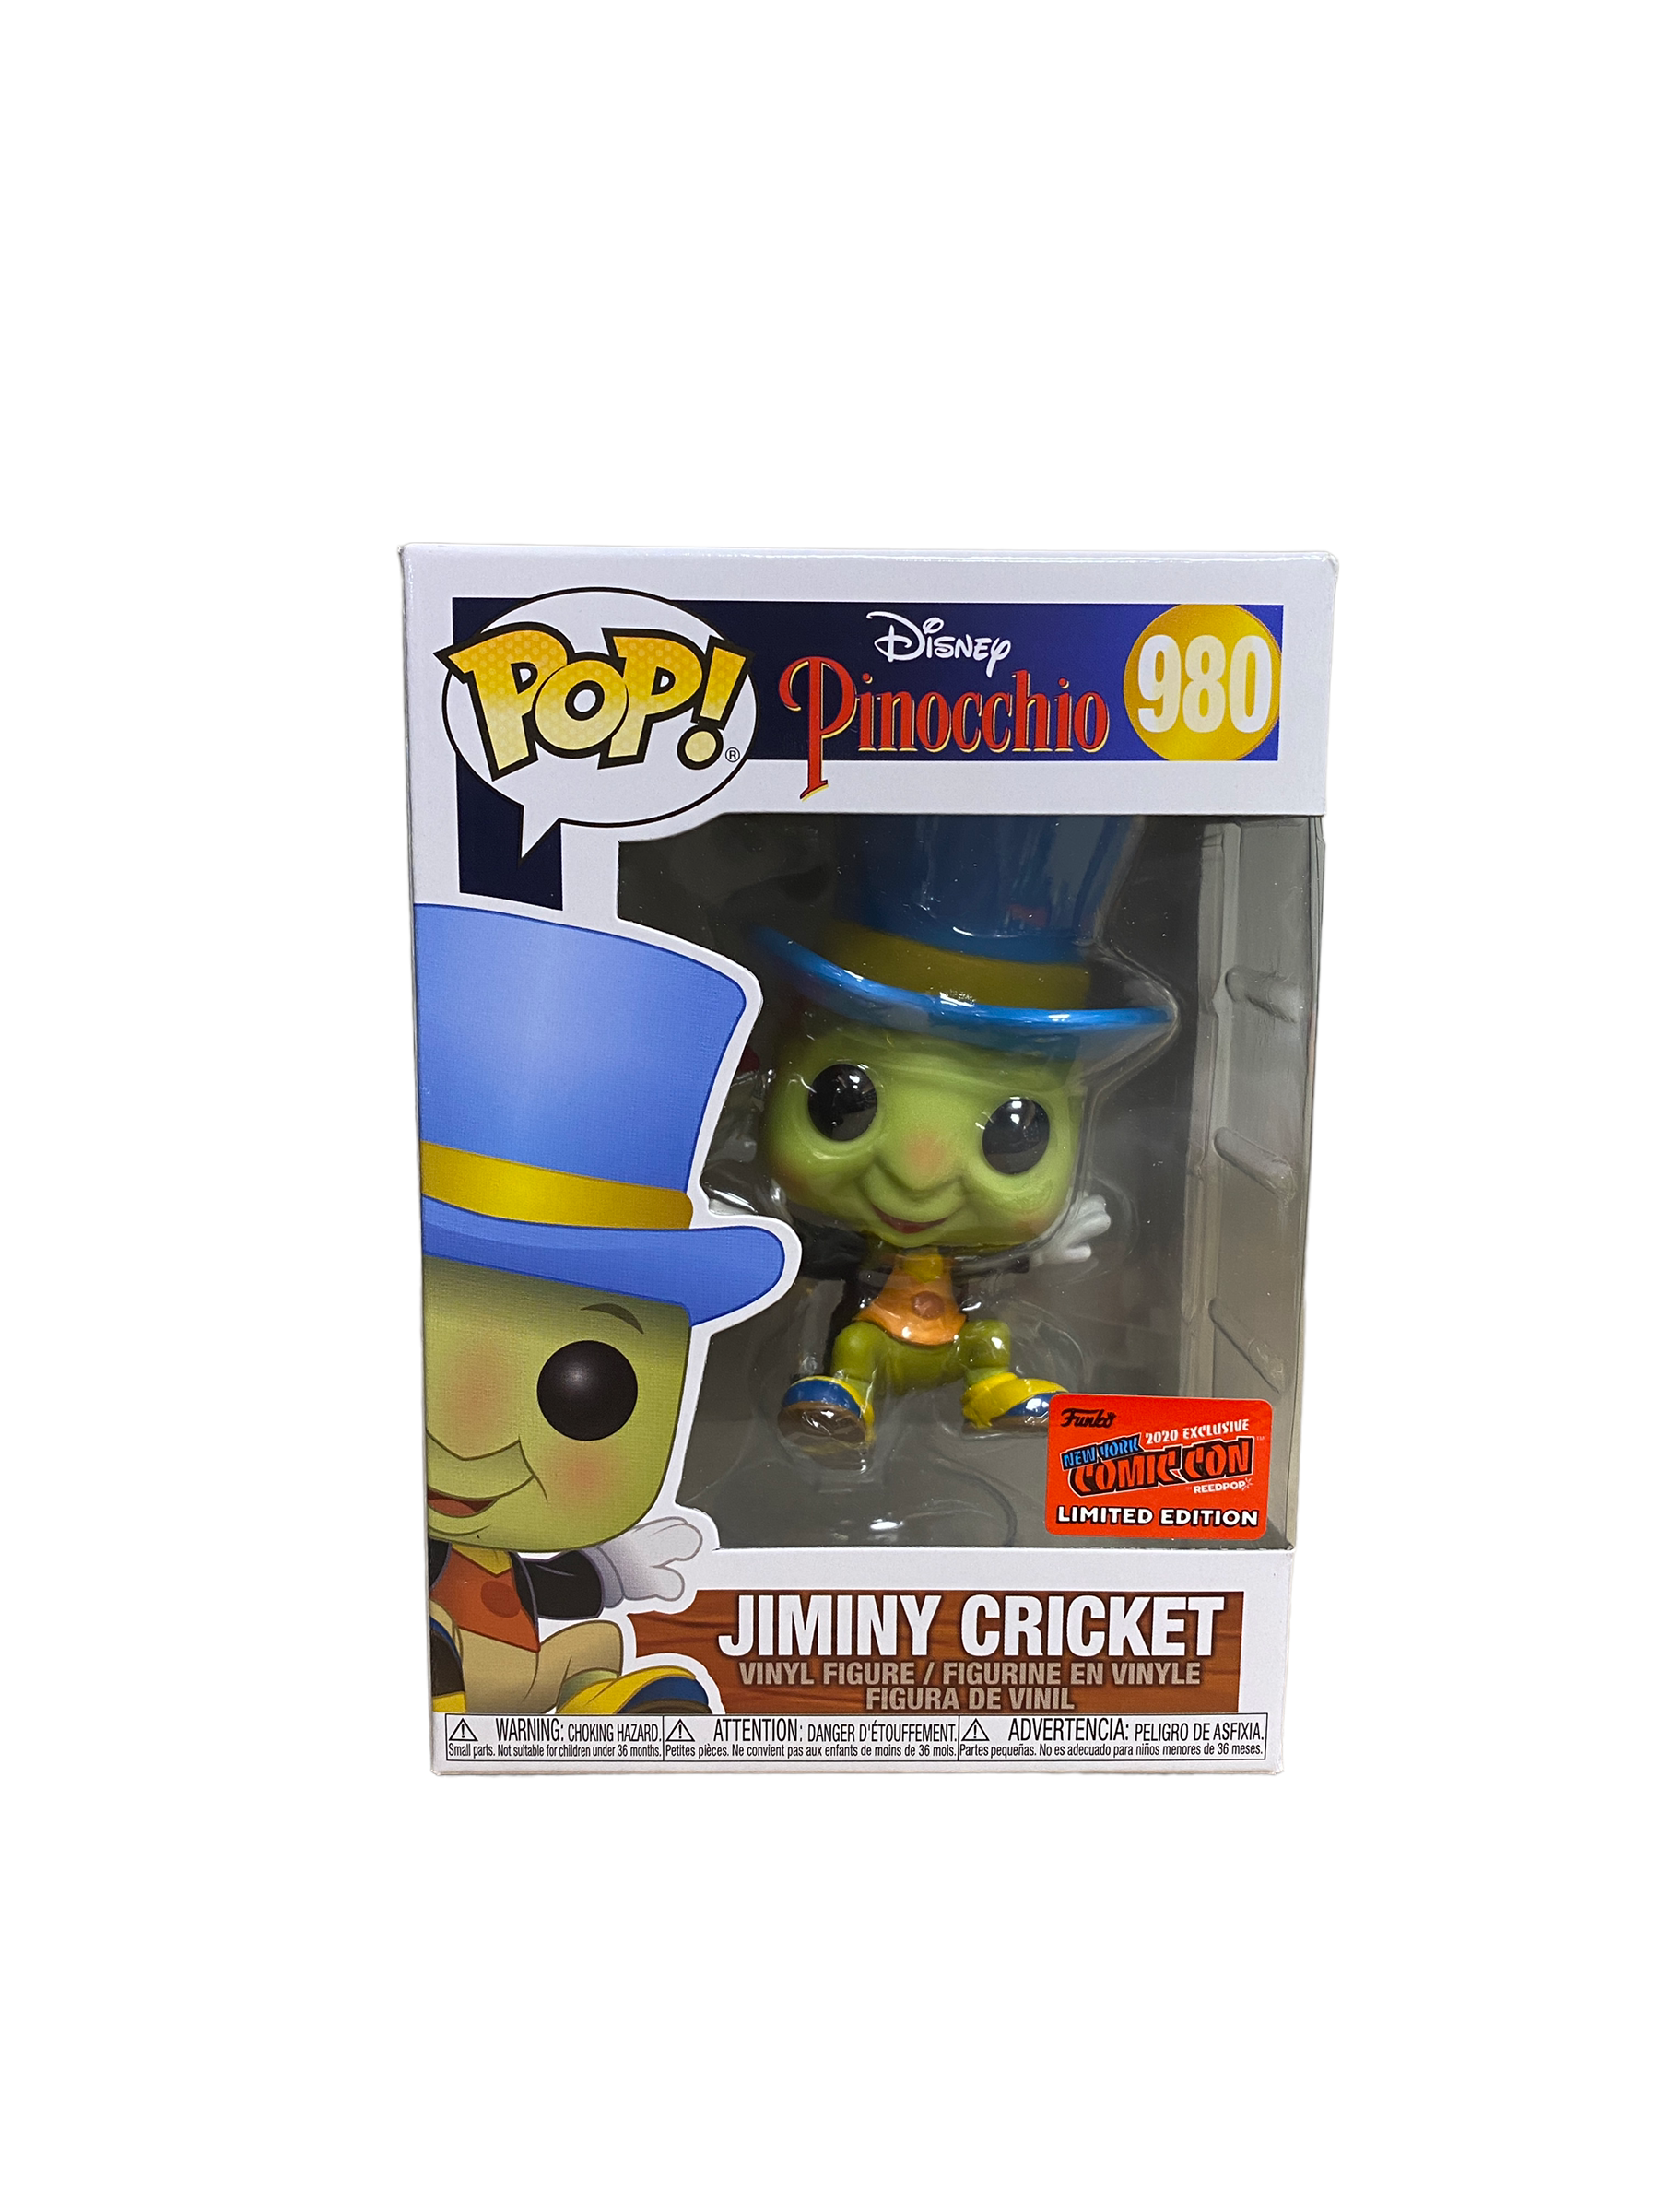 Jiminy Cricket #980 (Floating) Funko Pop! - Pinocchio - NYCC 2020 Official Convention Exclusive - Condition 9/10